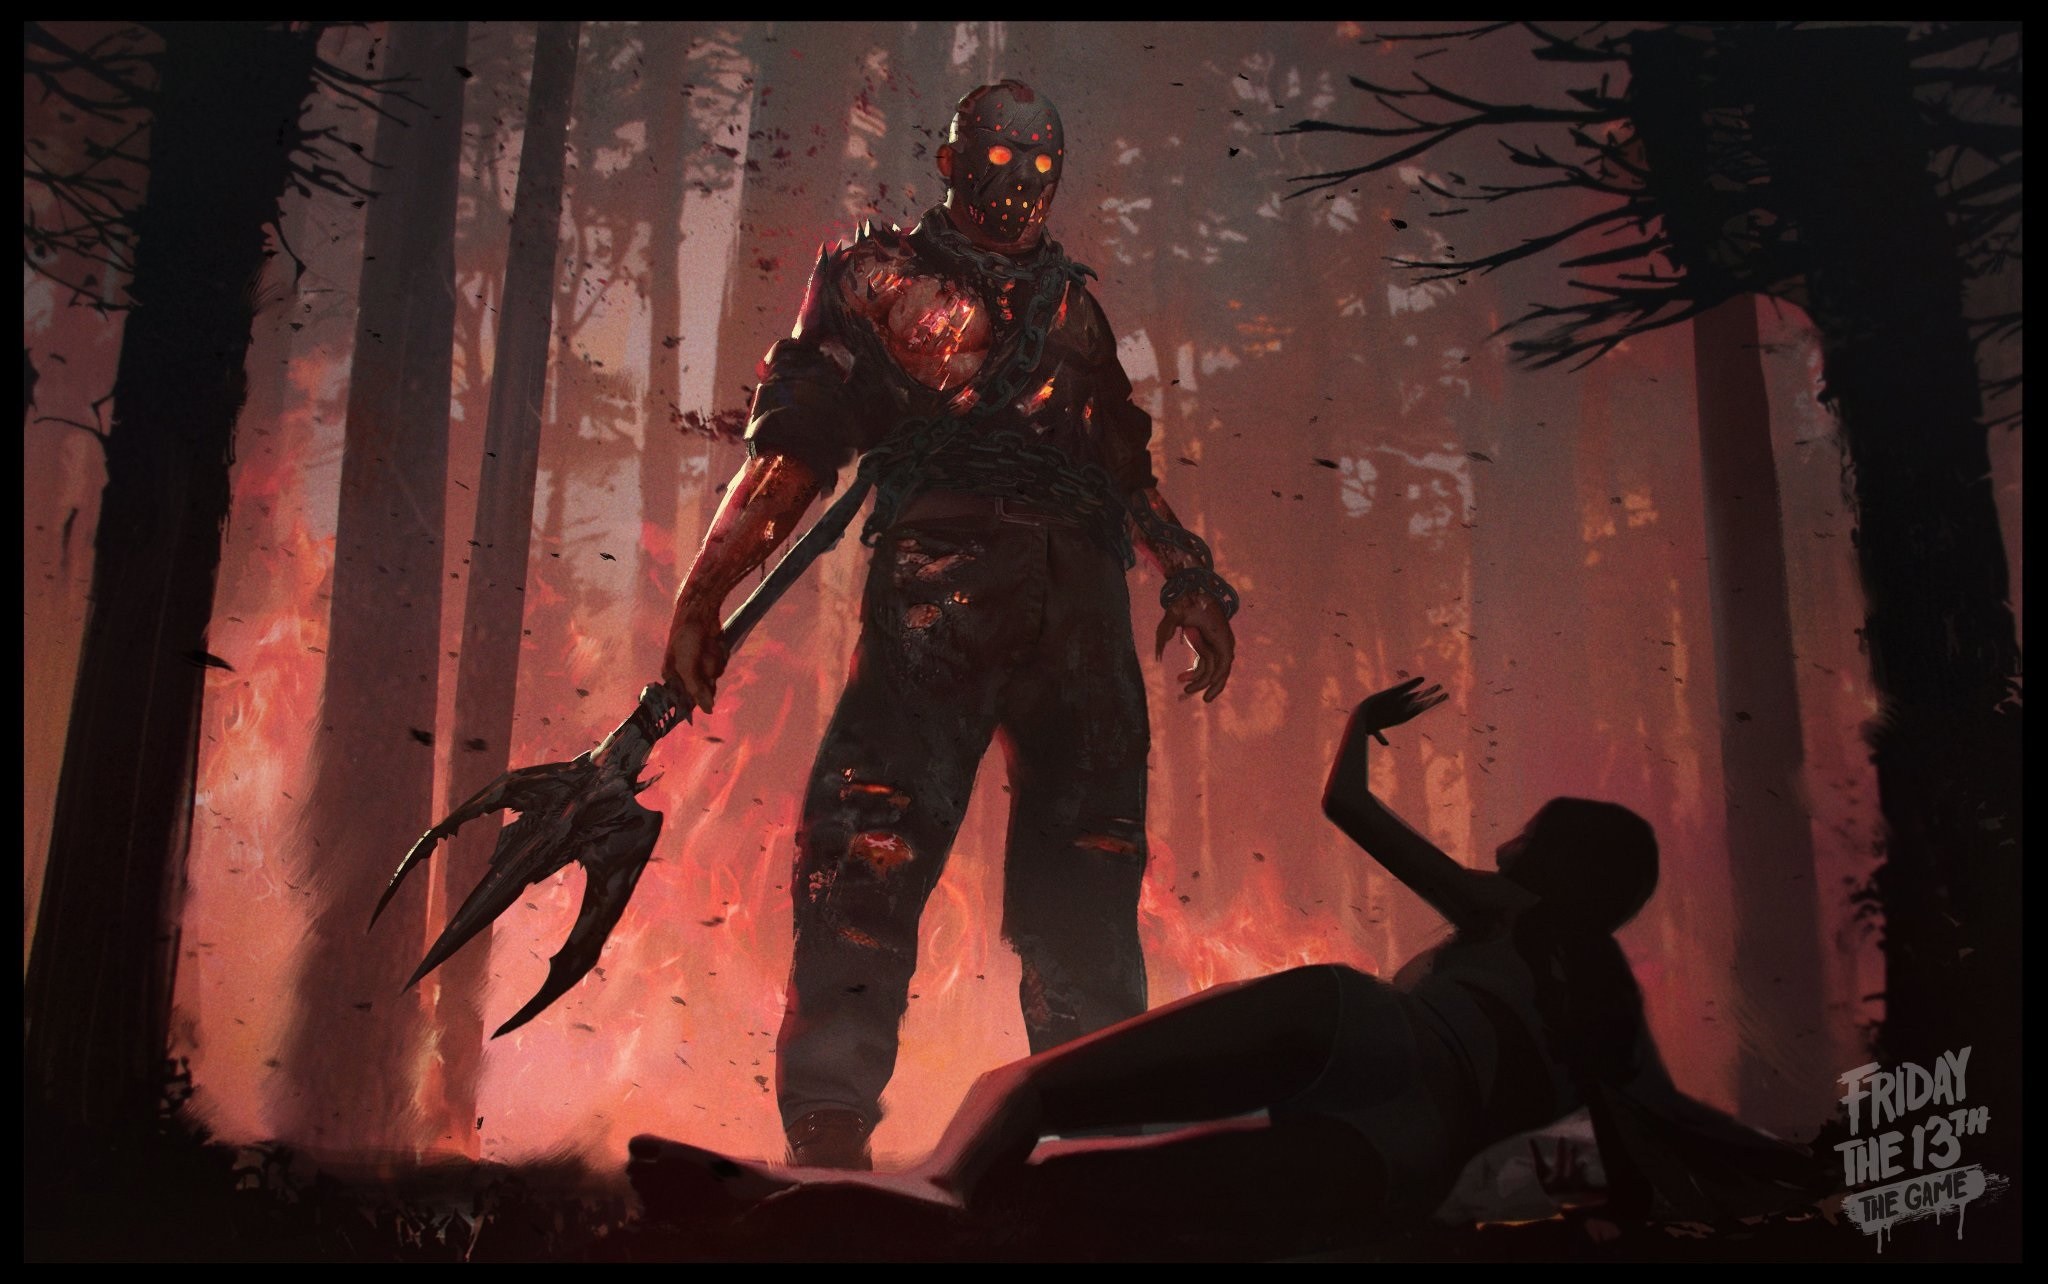 Download Friday The 13Th: The Game wallpapers for mobile phone, free  Friday The 13Th: The Game HD pictures